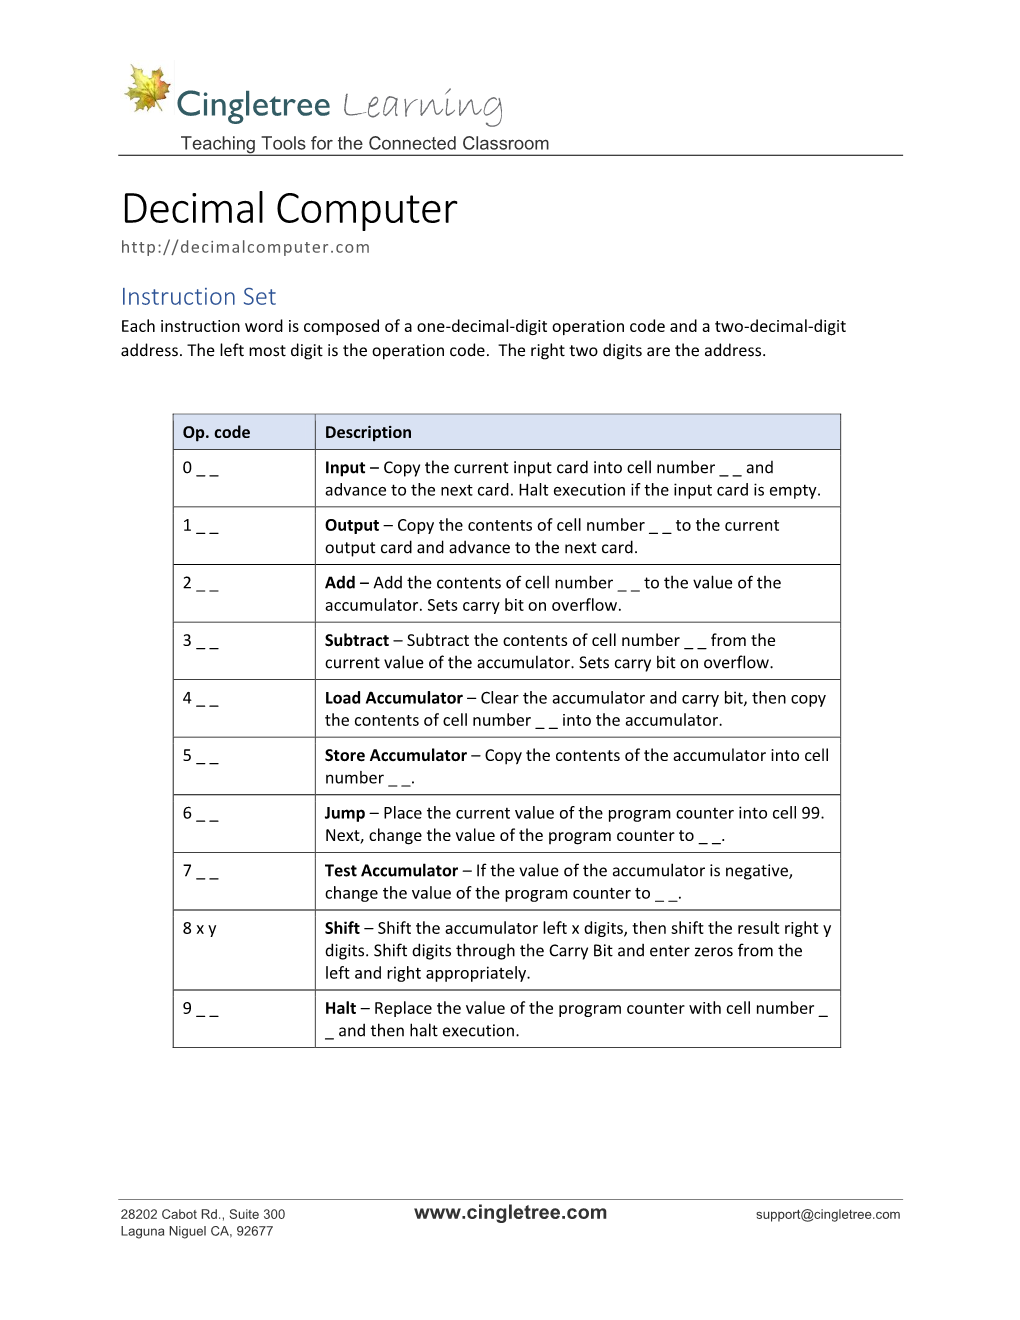 Instruction Set Each Instruction Word Is Composed of a One-Decimal-Digit Operation Code and a Two-Decimal-Digit Address